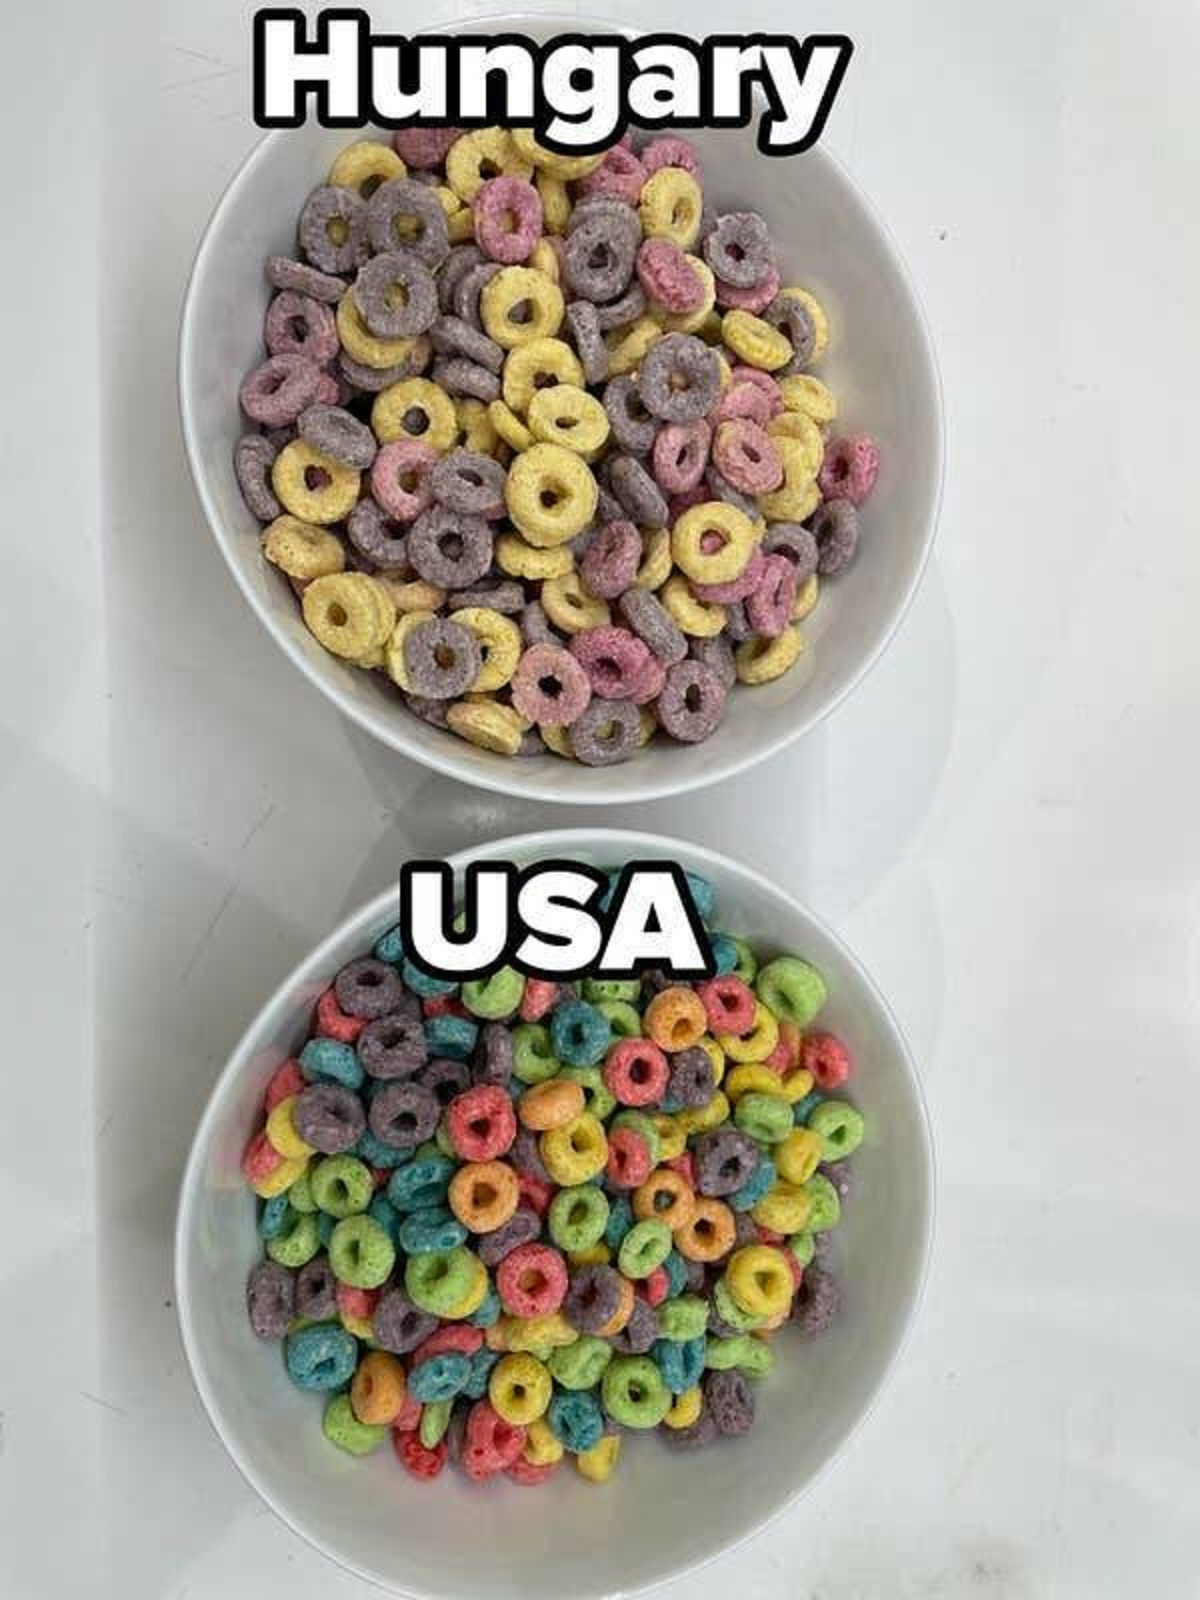 Because they don't allow artificial coloring, American Froot Loops and European Froot Loops are totally different.